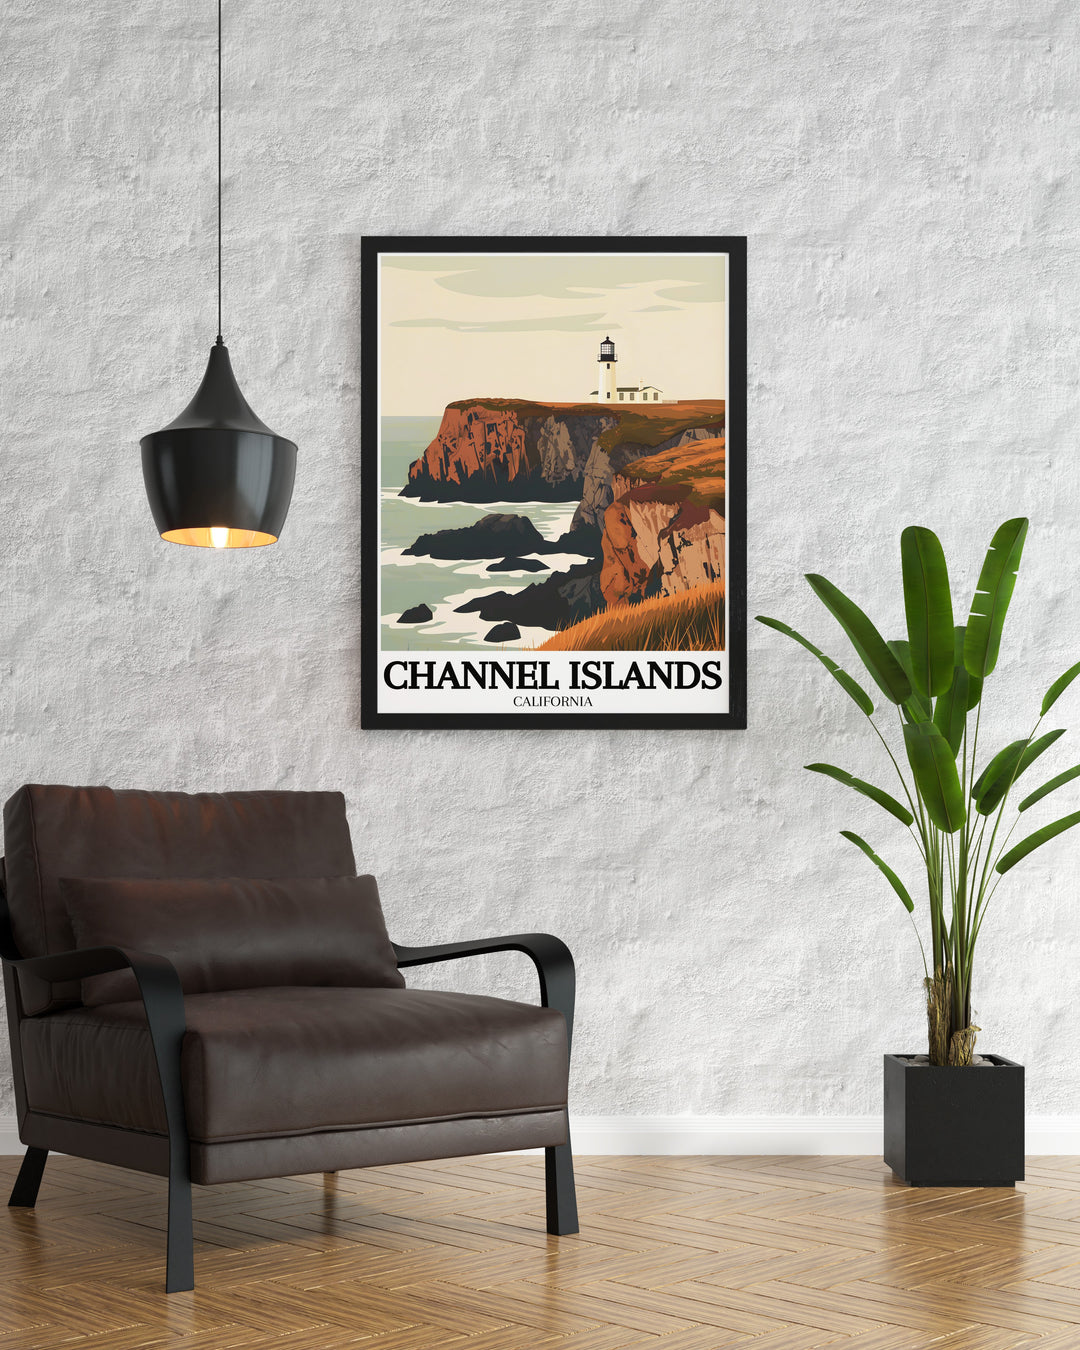 California poster highlighting the beauty of Anacapa Island, Anacapa lighthouse and the scenic Channel Islands National Park an inspiring addition to any bucket list print collection.